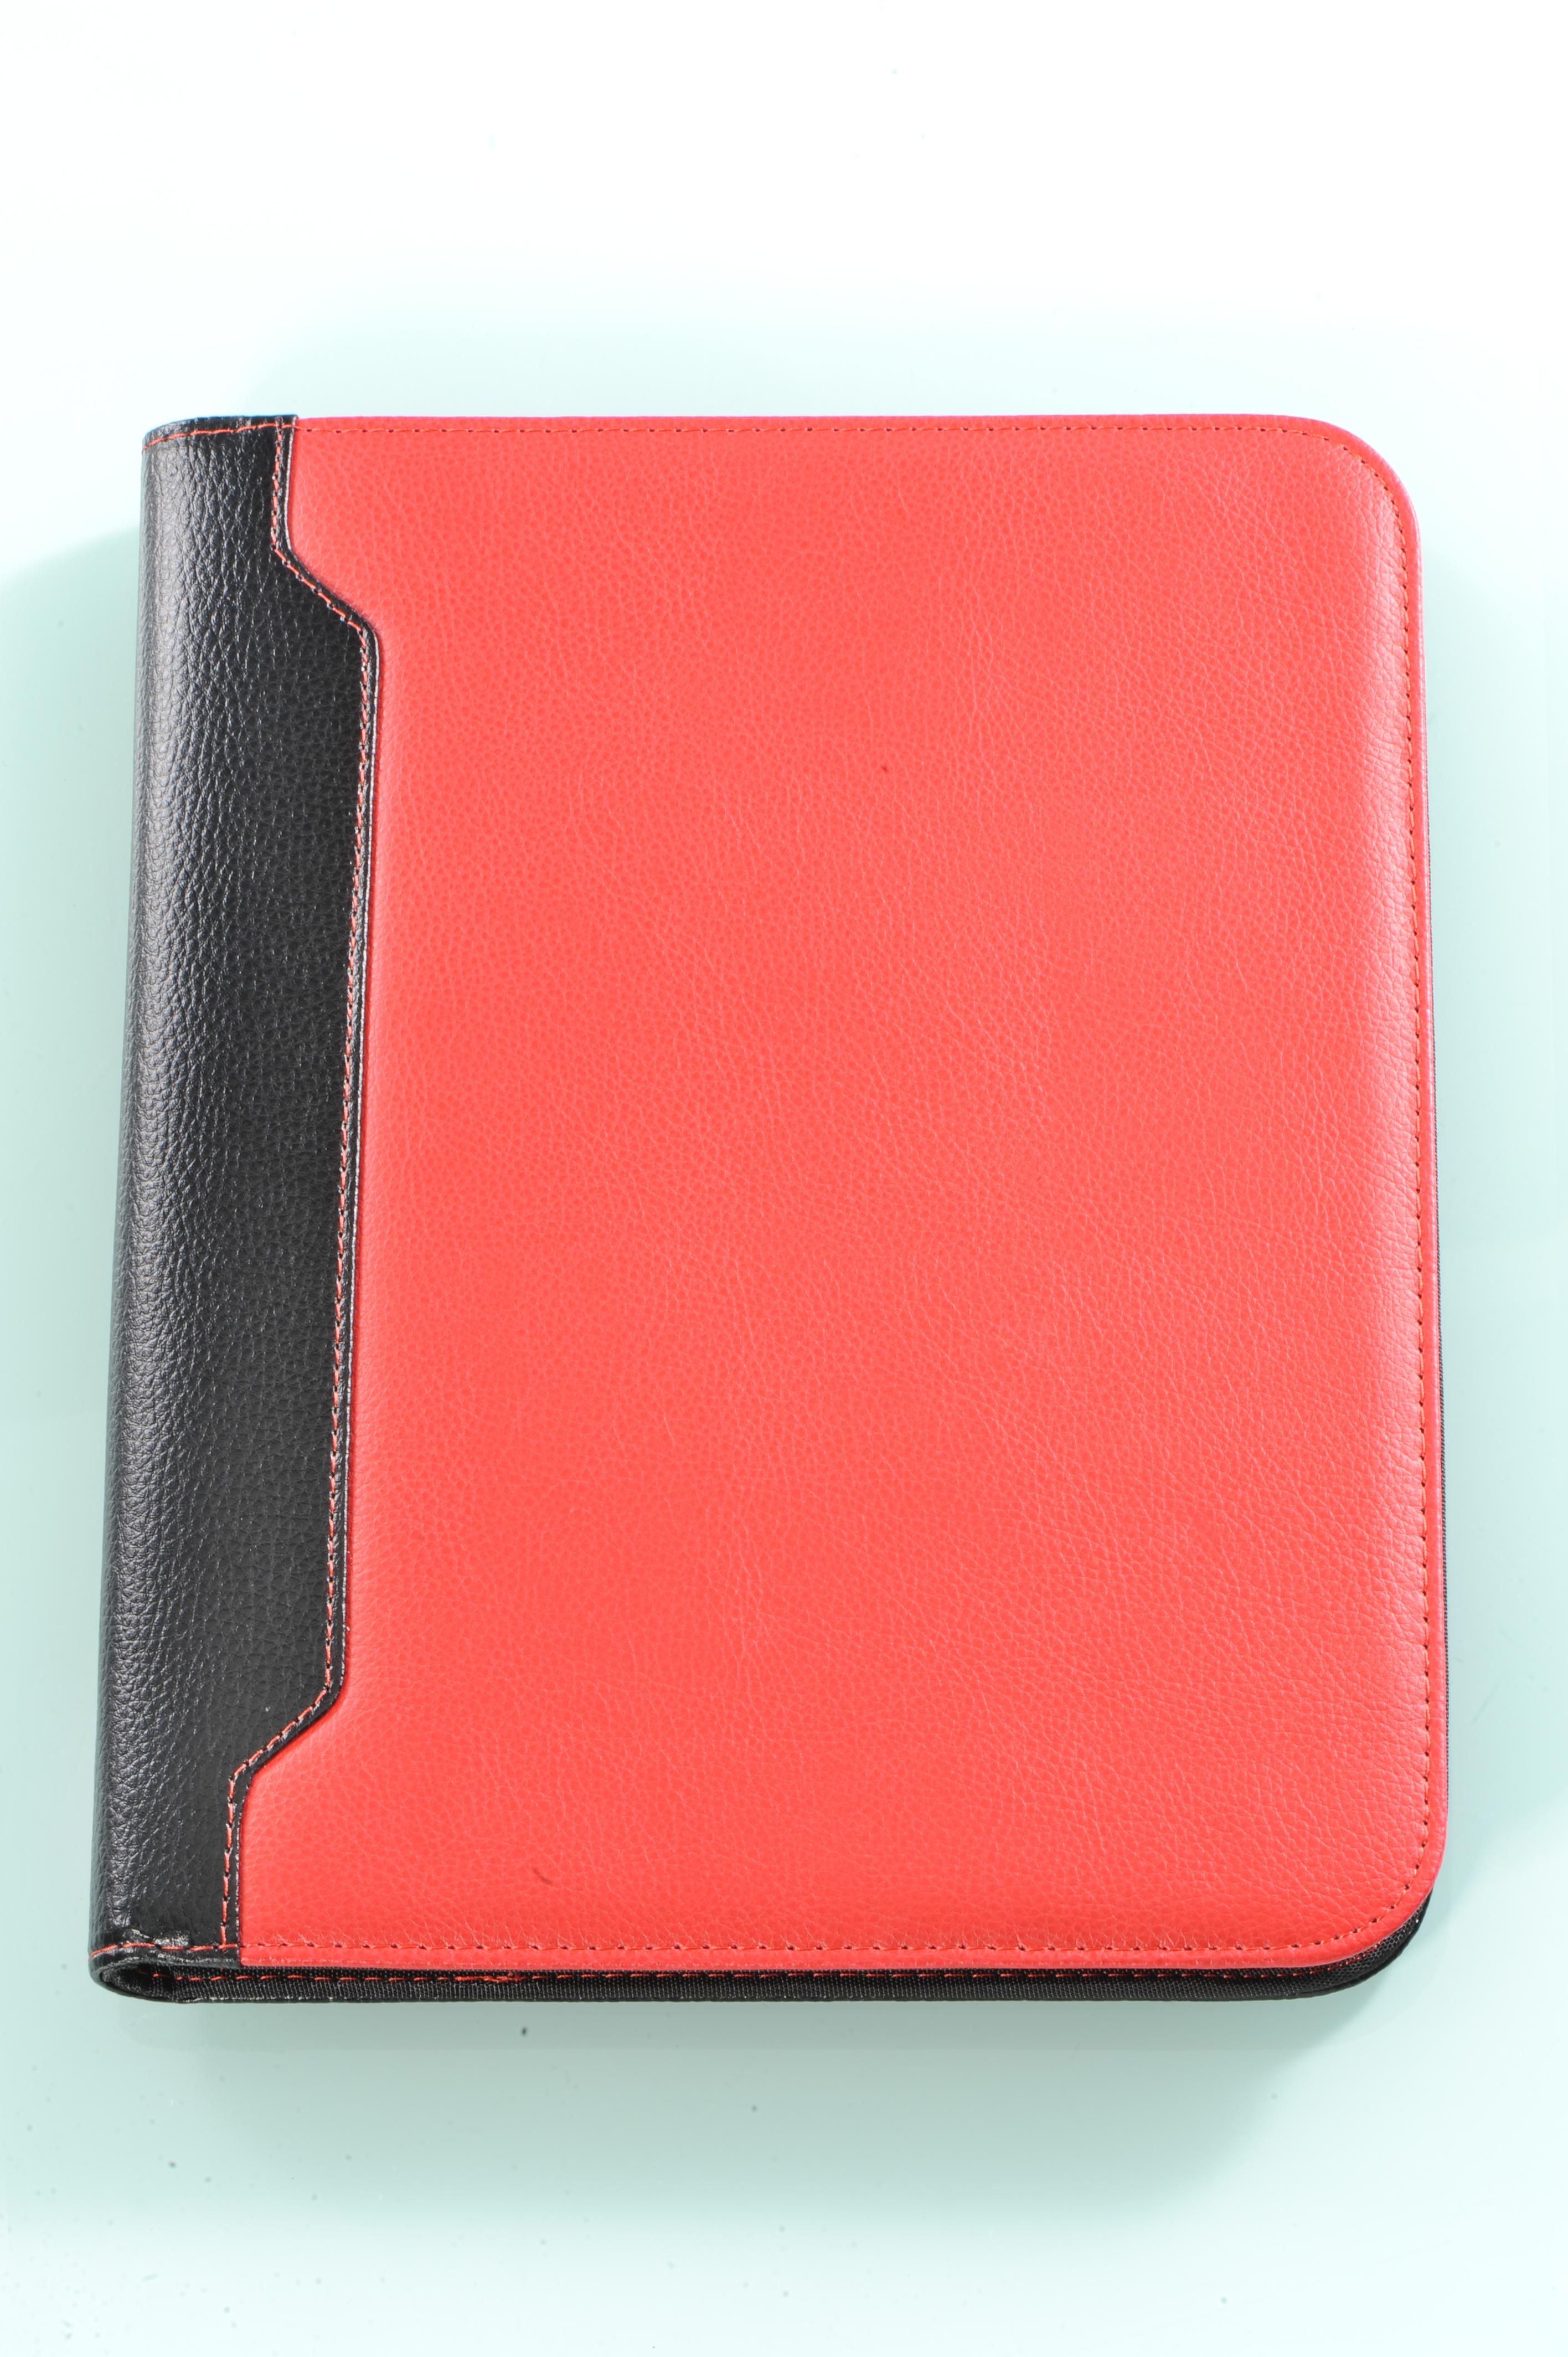 Buy cheap business zippered file folder portfolio from wholesalers